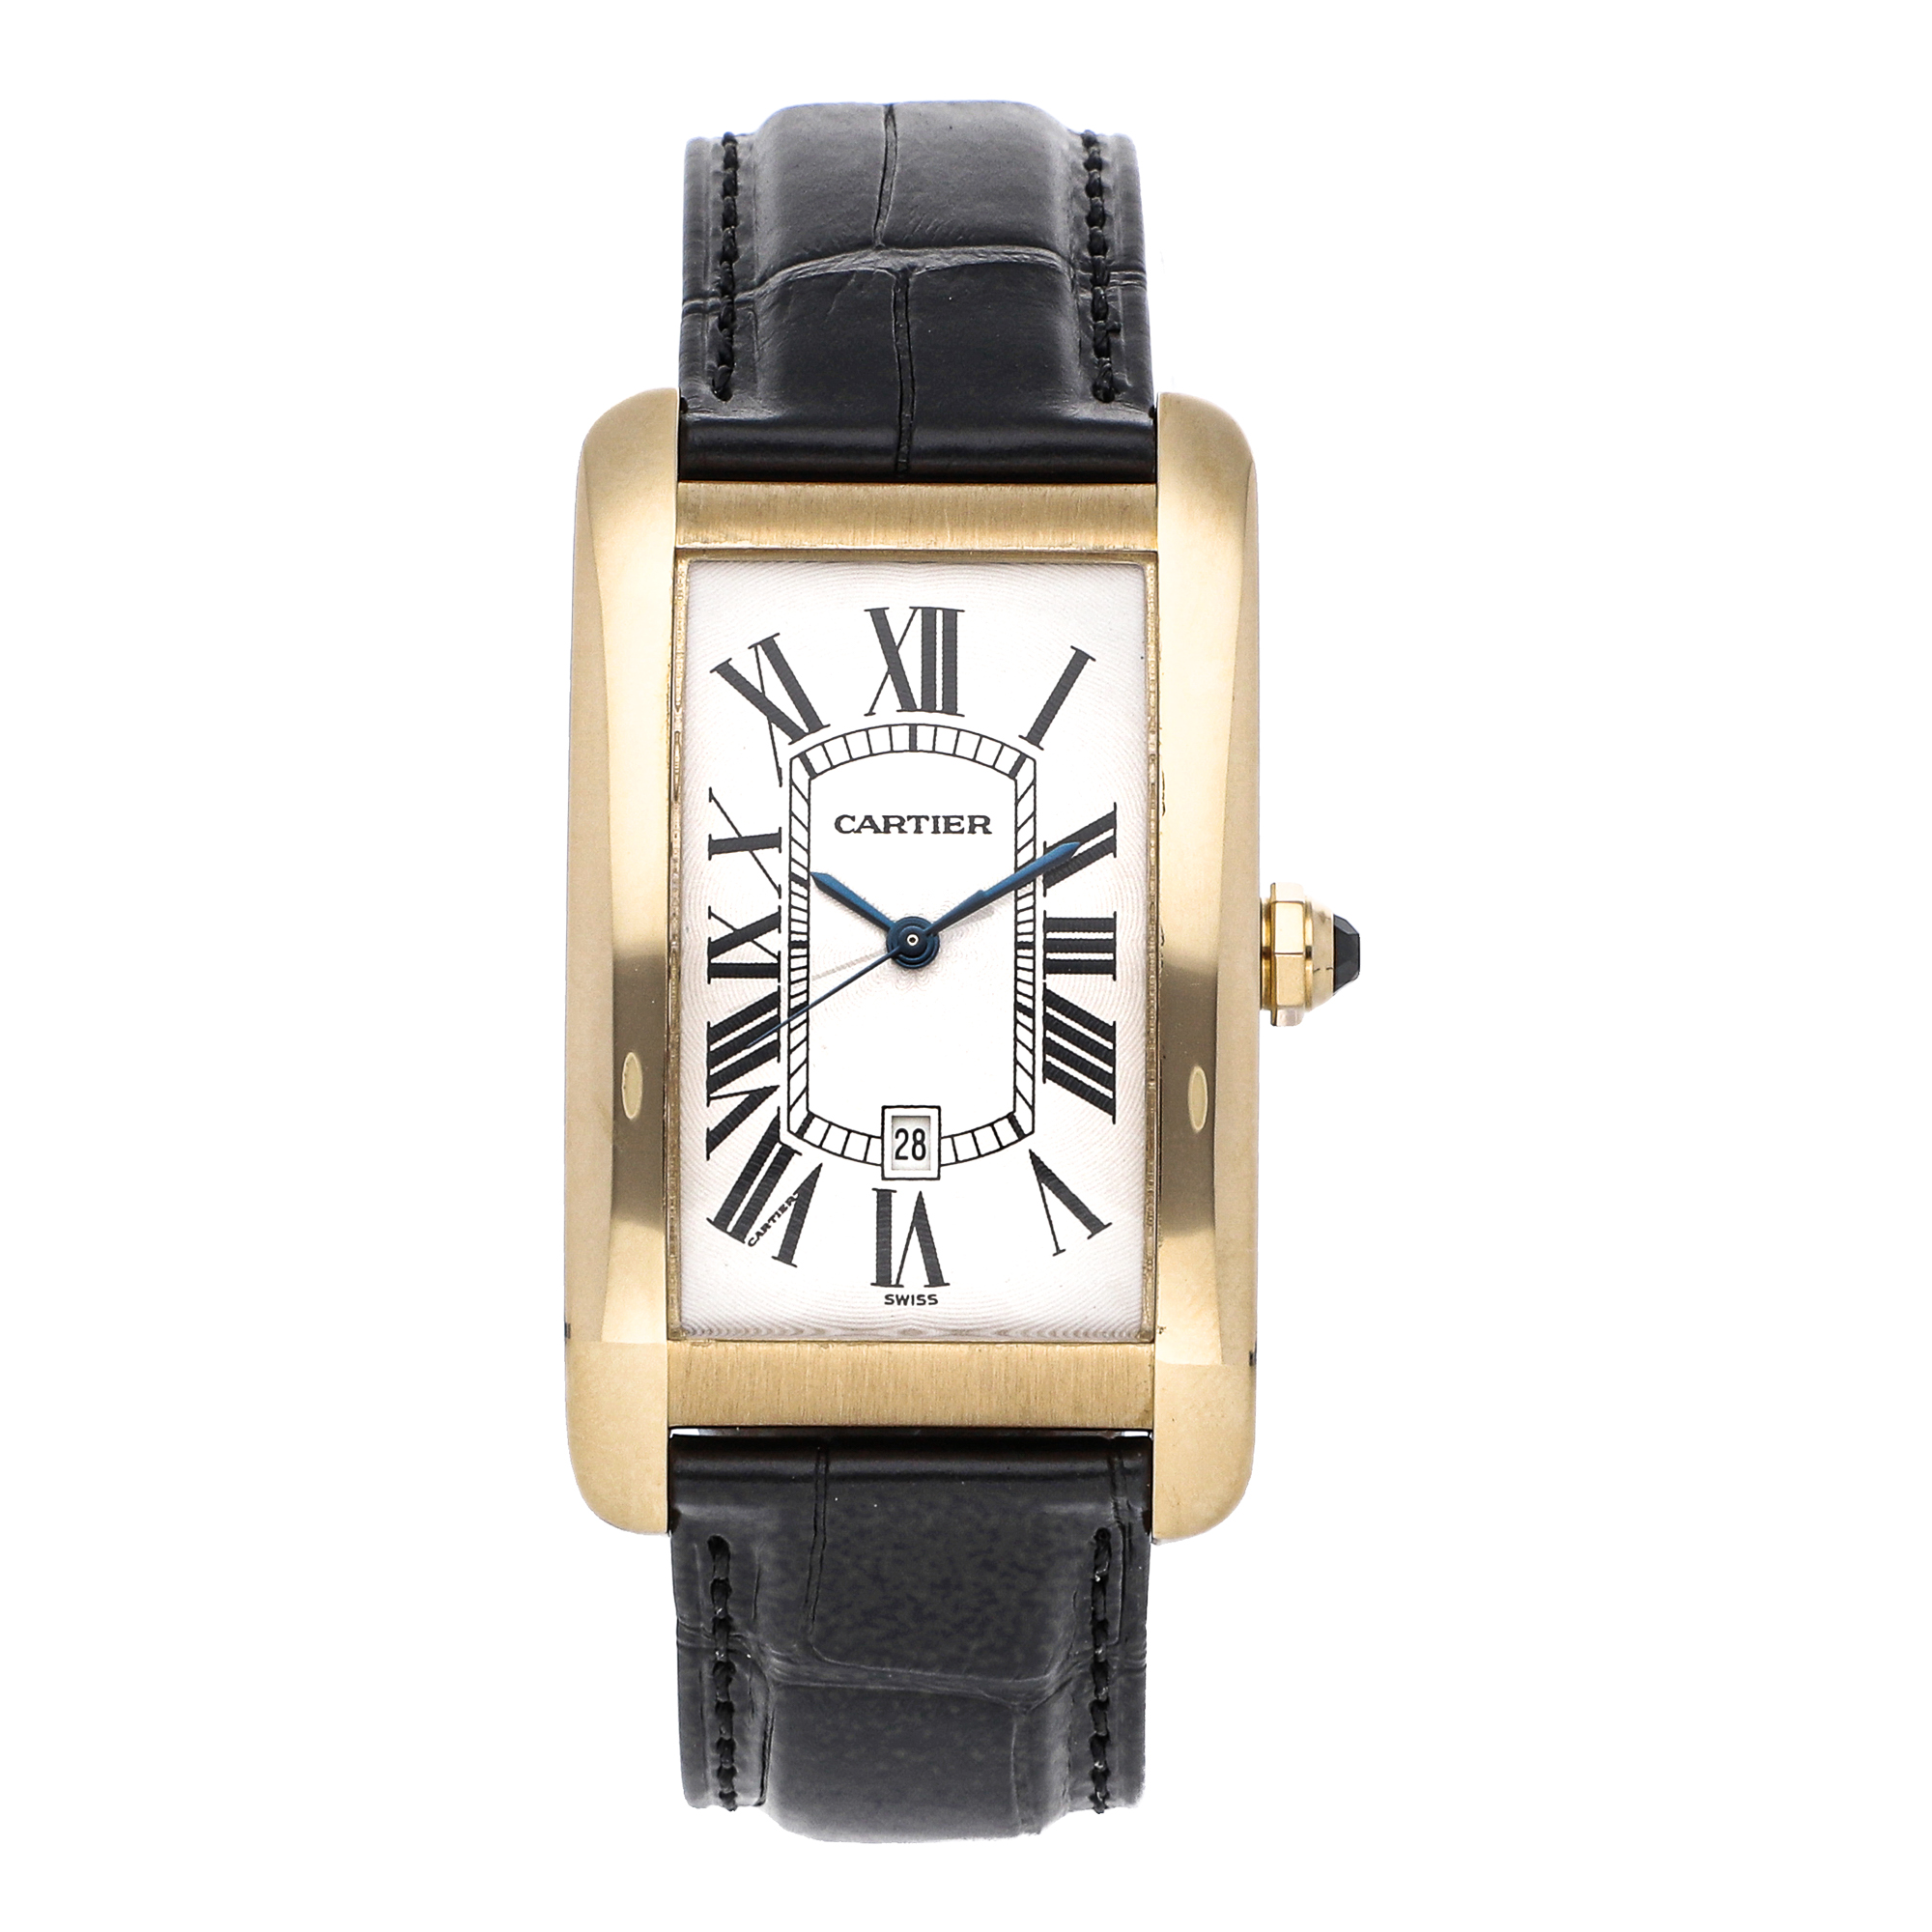 Certified Pre-Owned Cartier Watches for 